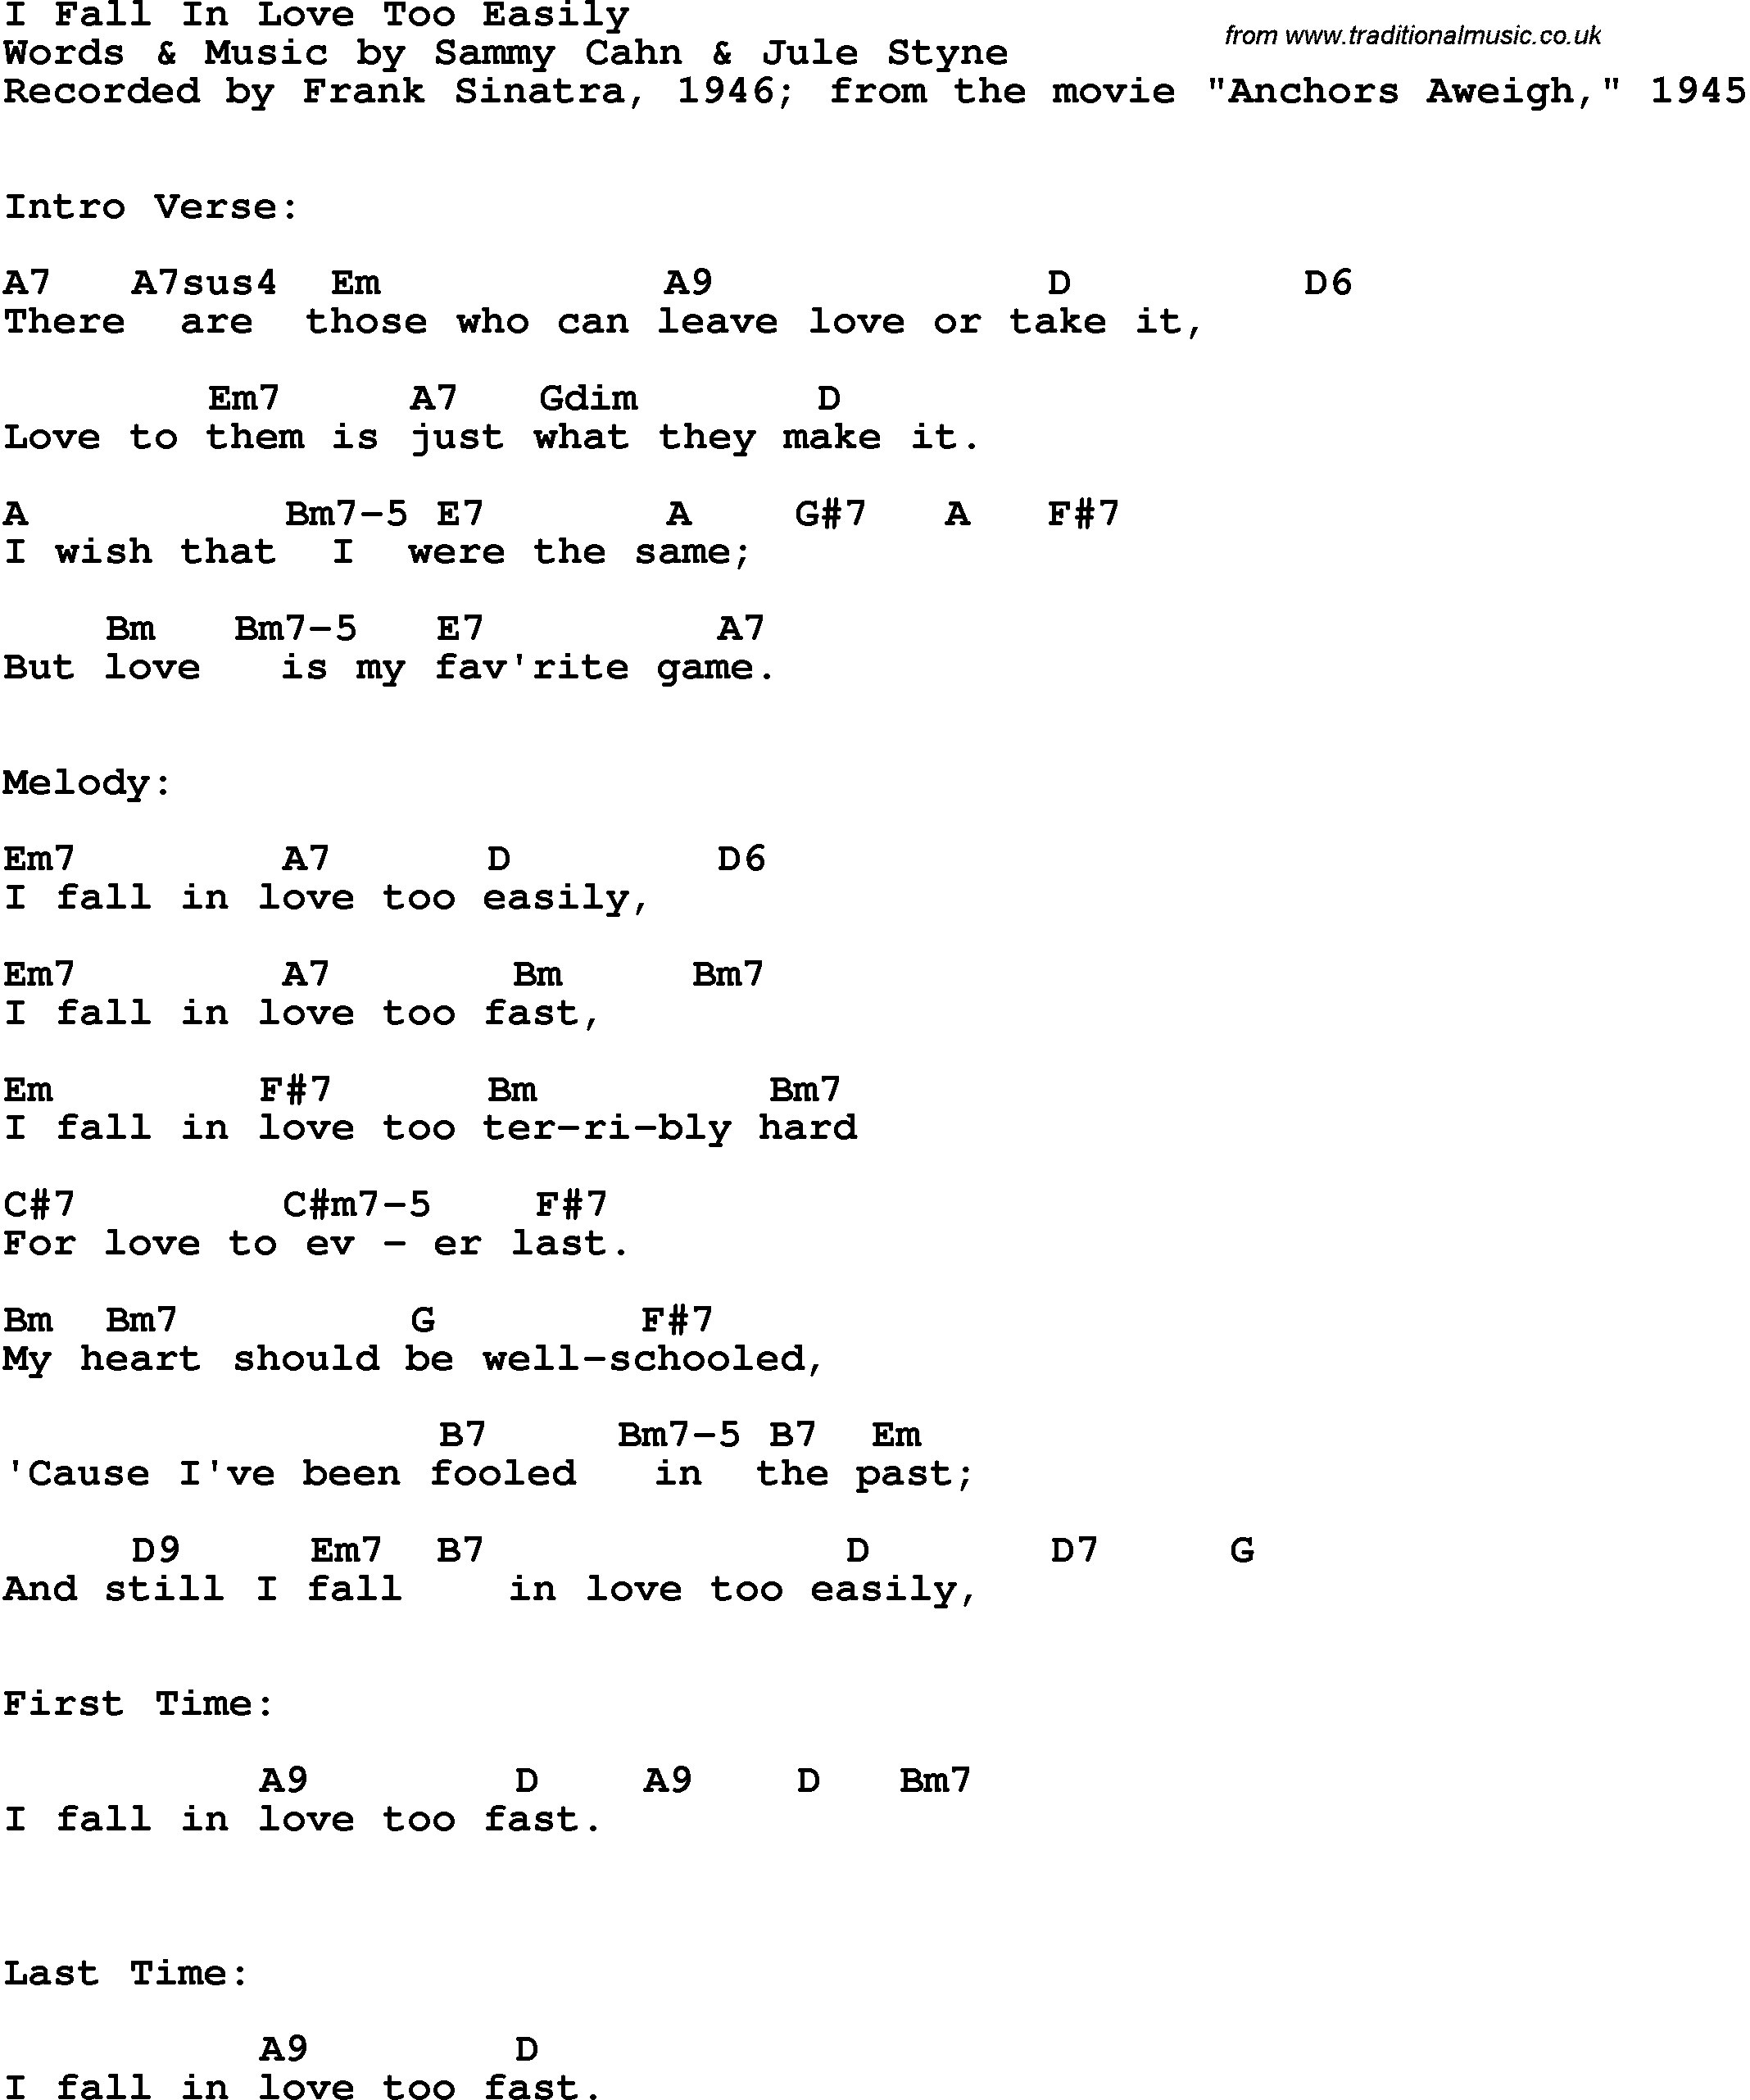 Song Lyrics with guitar chords for I Fall In Love Too Easily - Frank Sinatra, 1946